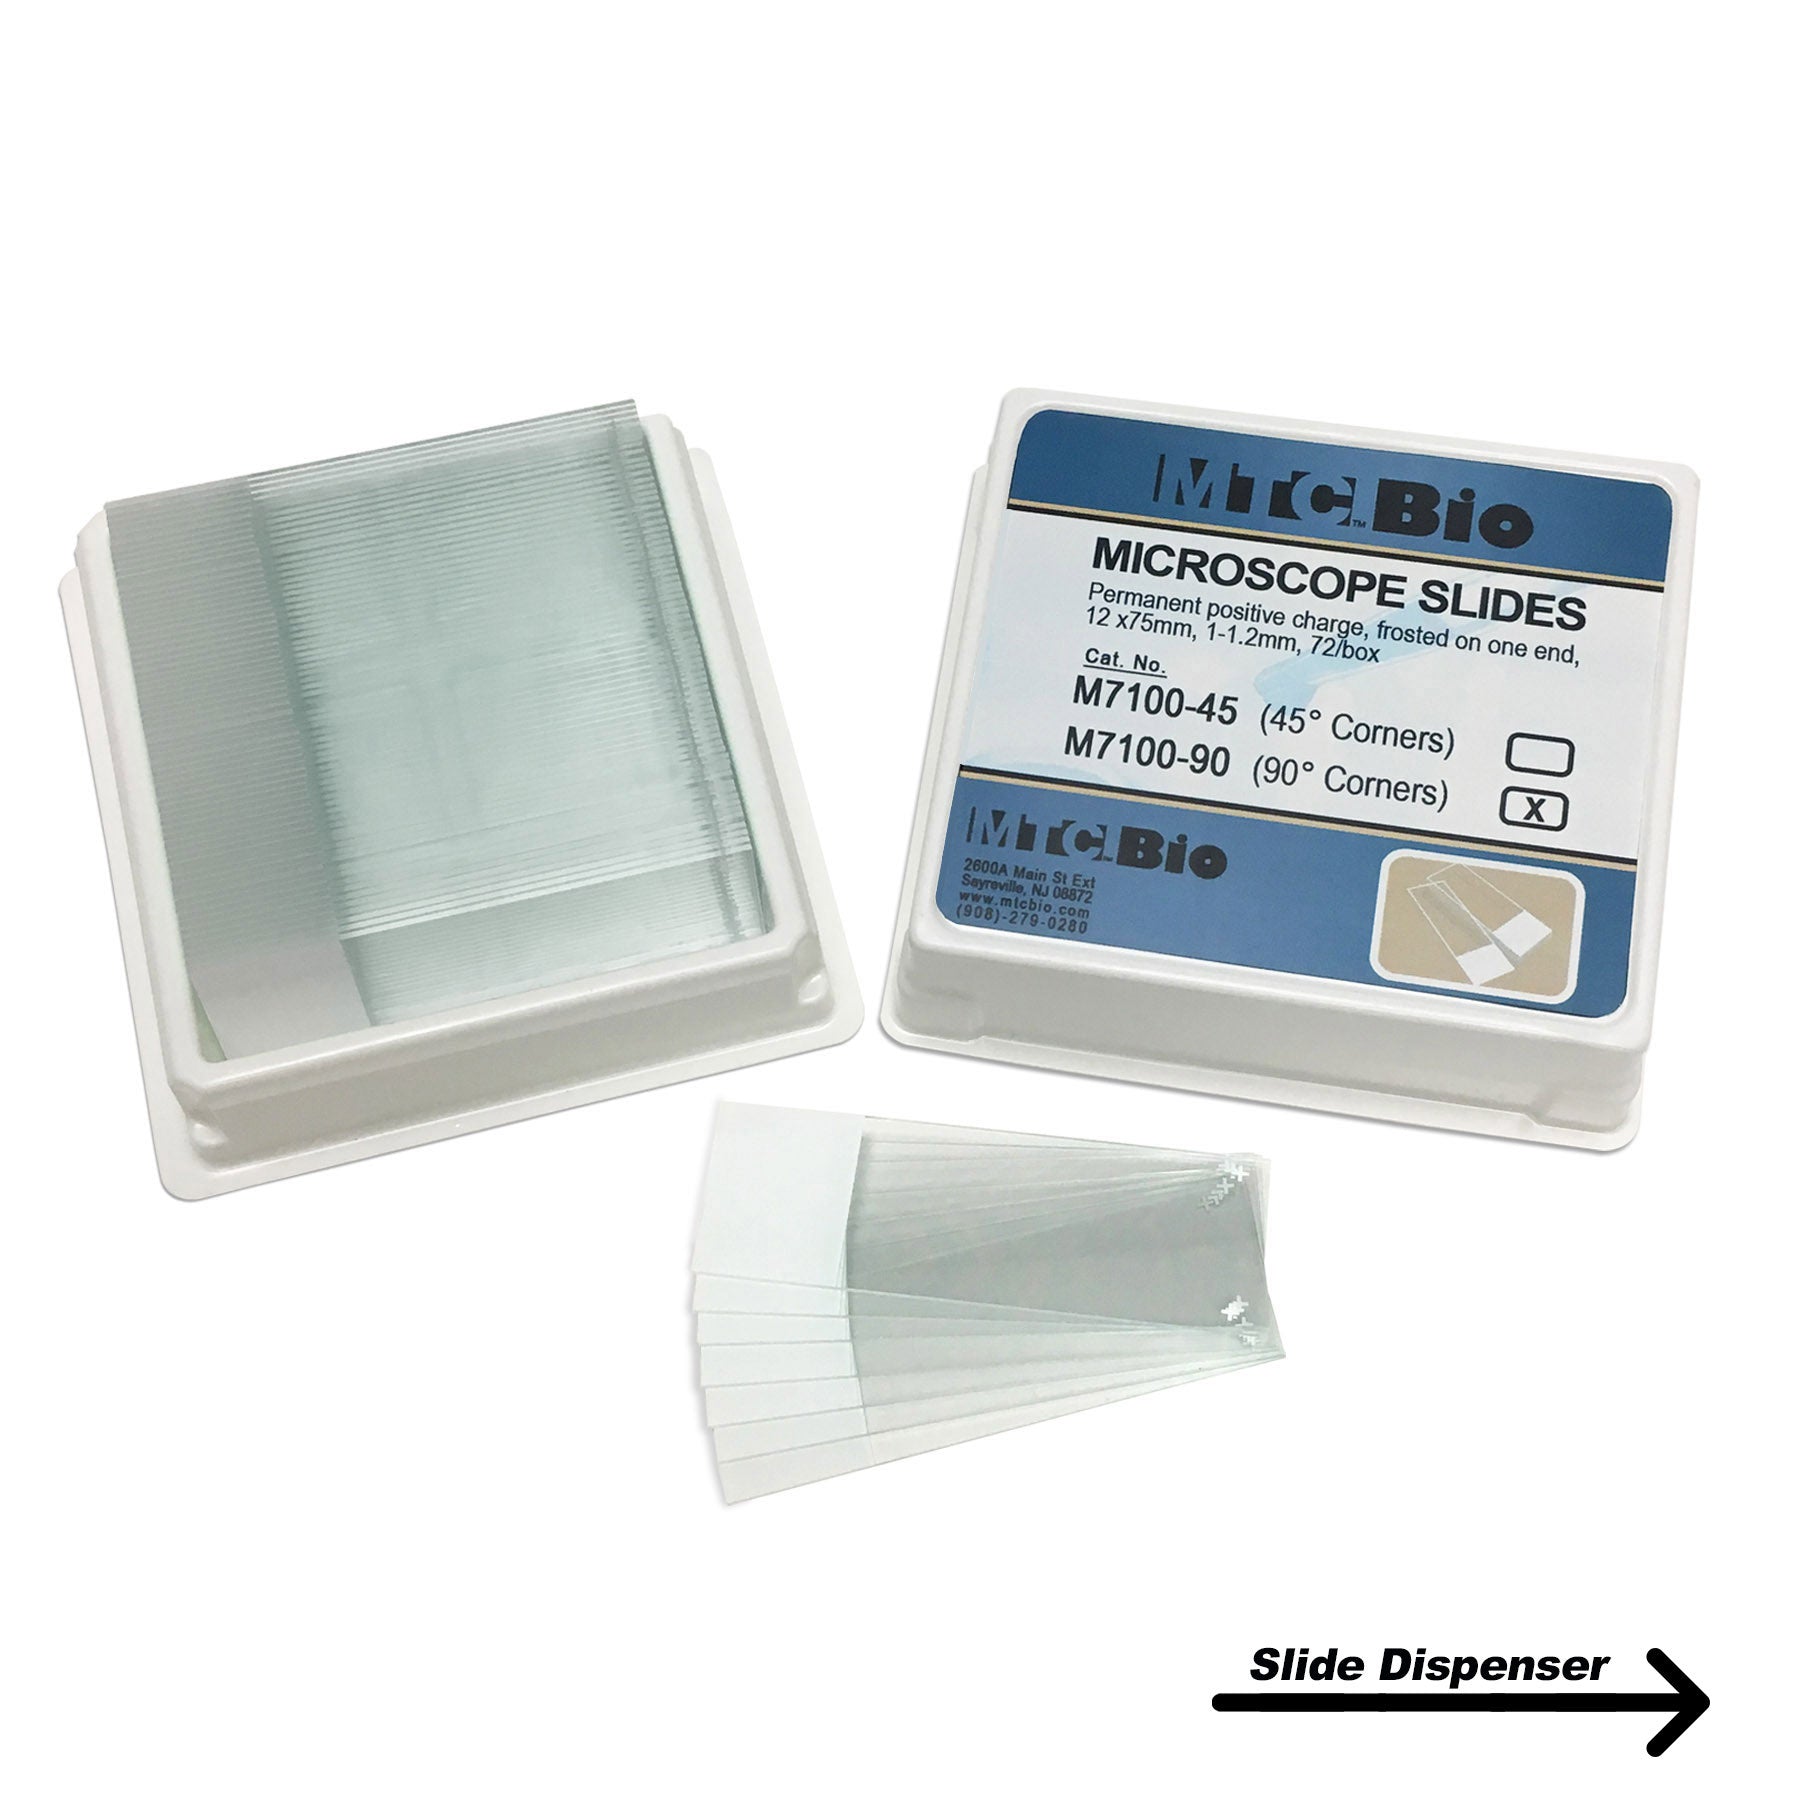 MTC Bio M7100-90, Microscope Slides, Positive Charged, 90° Corners, Frosted On One End, 25 x 75mm, 72/pk